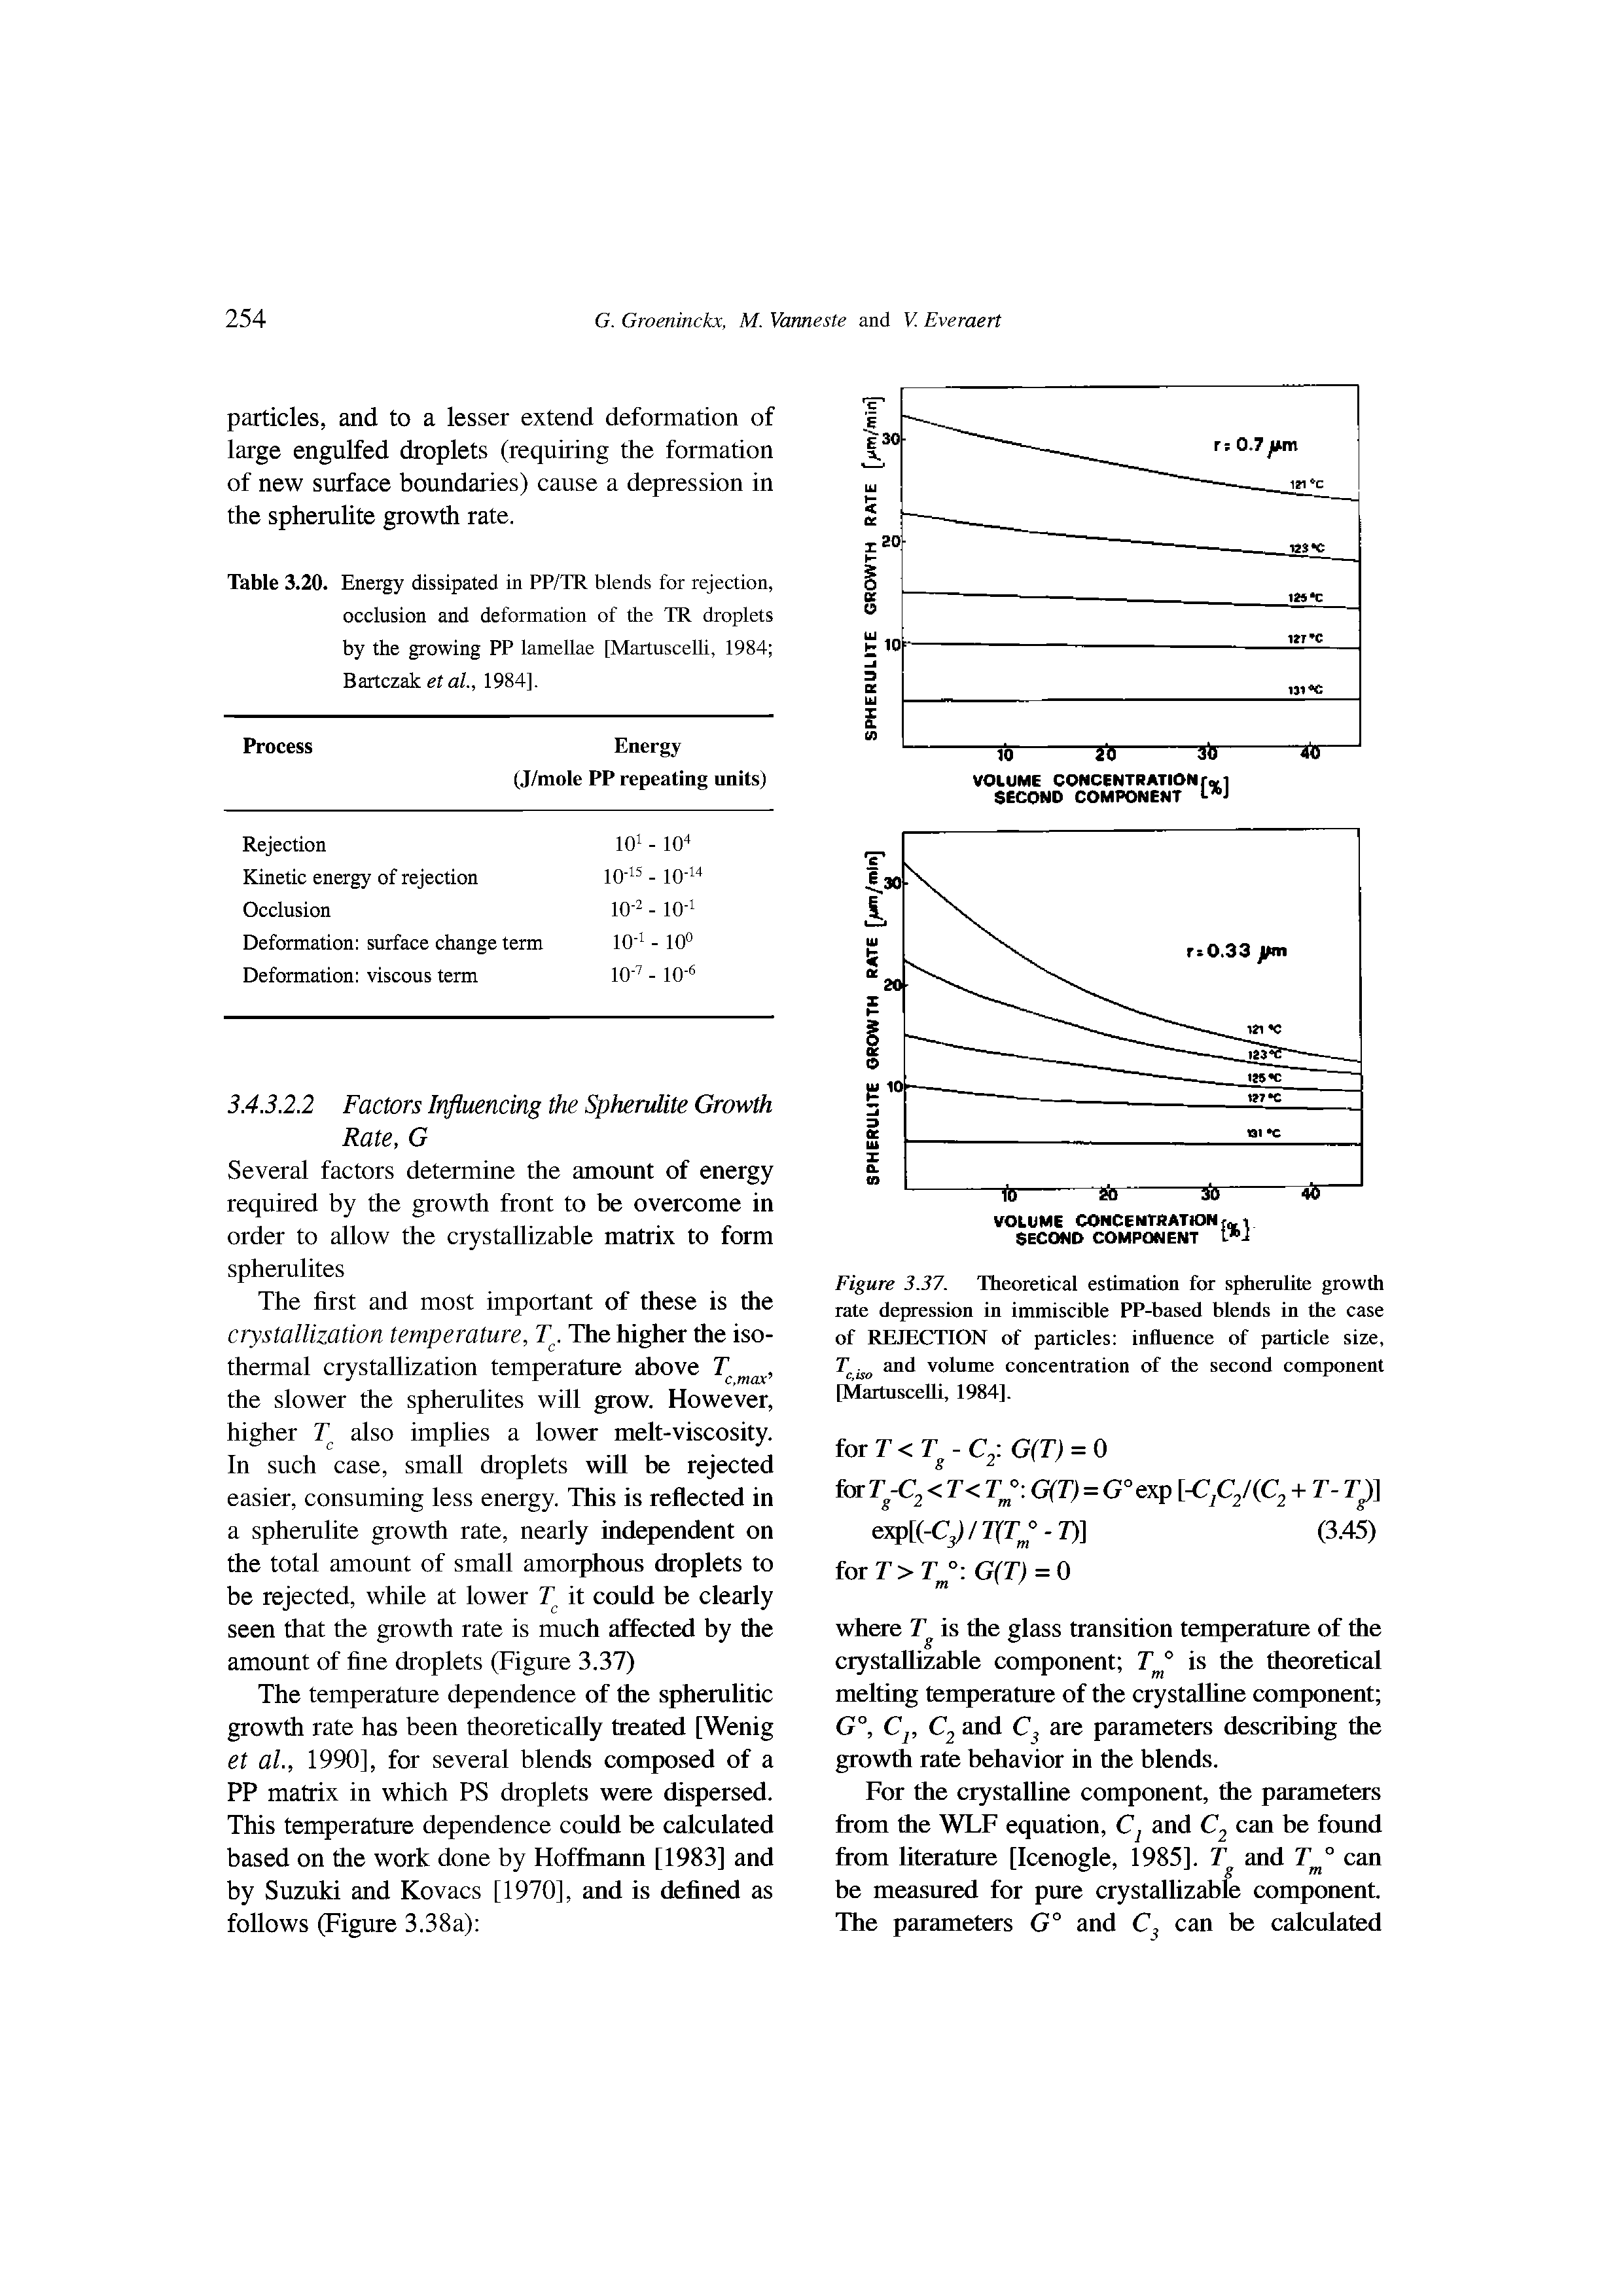 Figure 3.37. Theoretical estimation for sphemlite growth rate depression in immiscible PP-based blends in the case of REJECTION of particles influence of particle size, and volume concentration of the second component [Martuscelli, 1984].